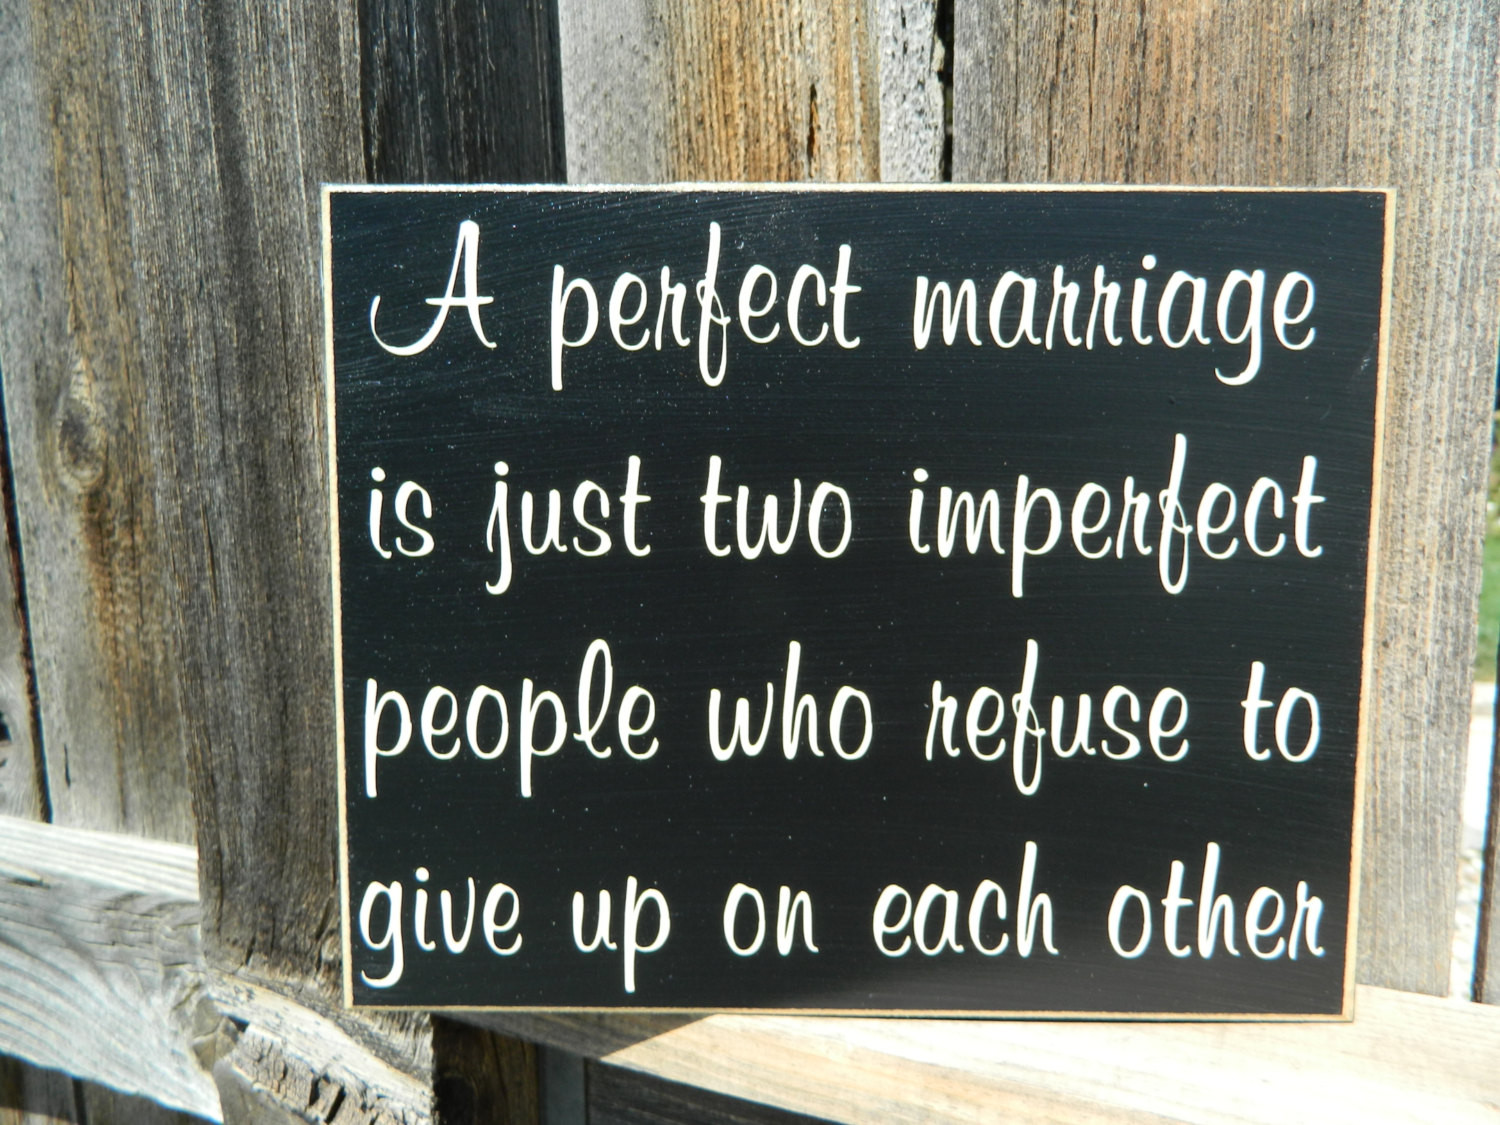 Quote About Marriage
 Inspirational QuoteA perfect marriage wood sign